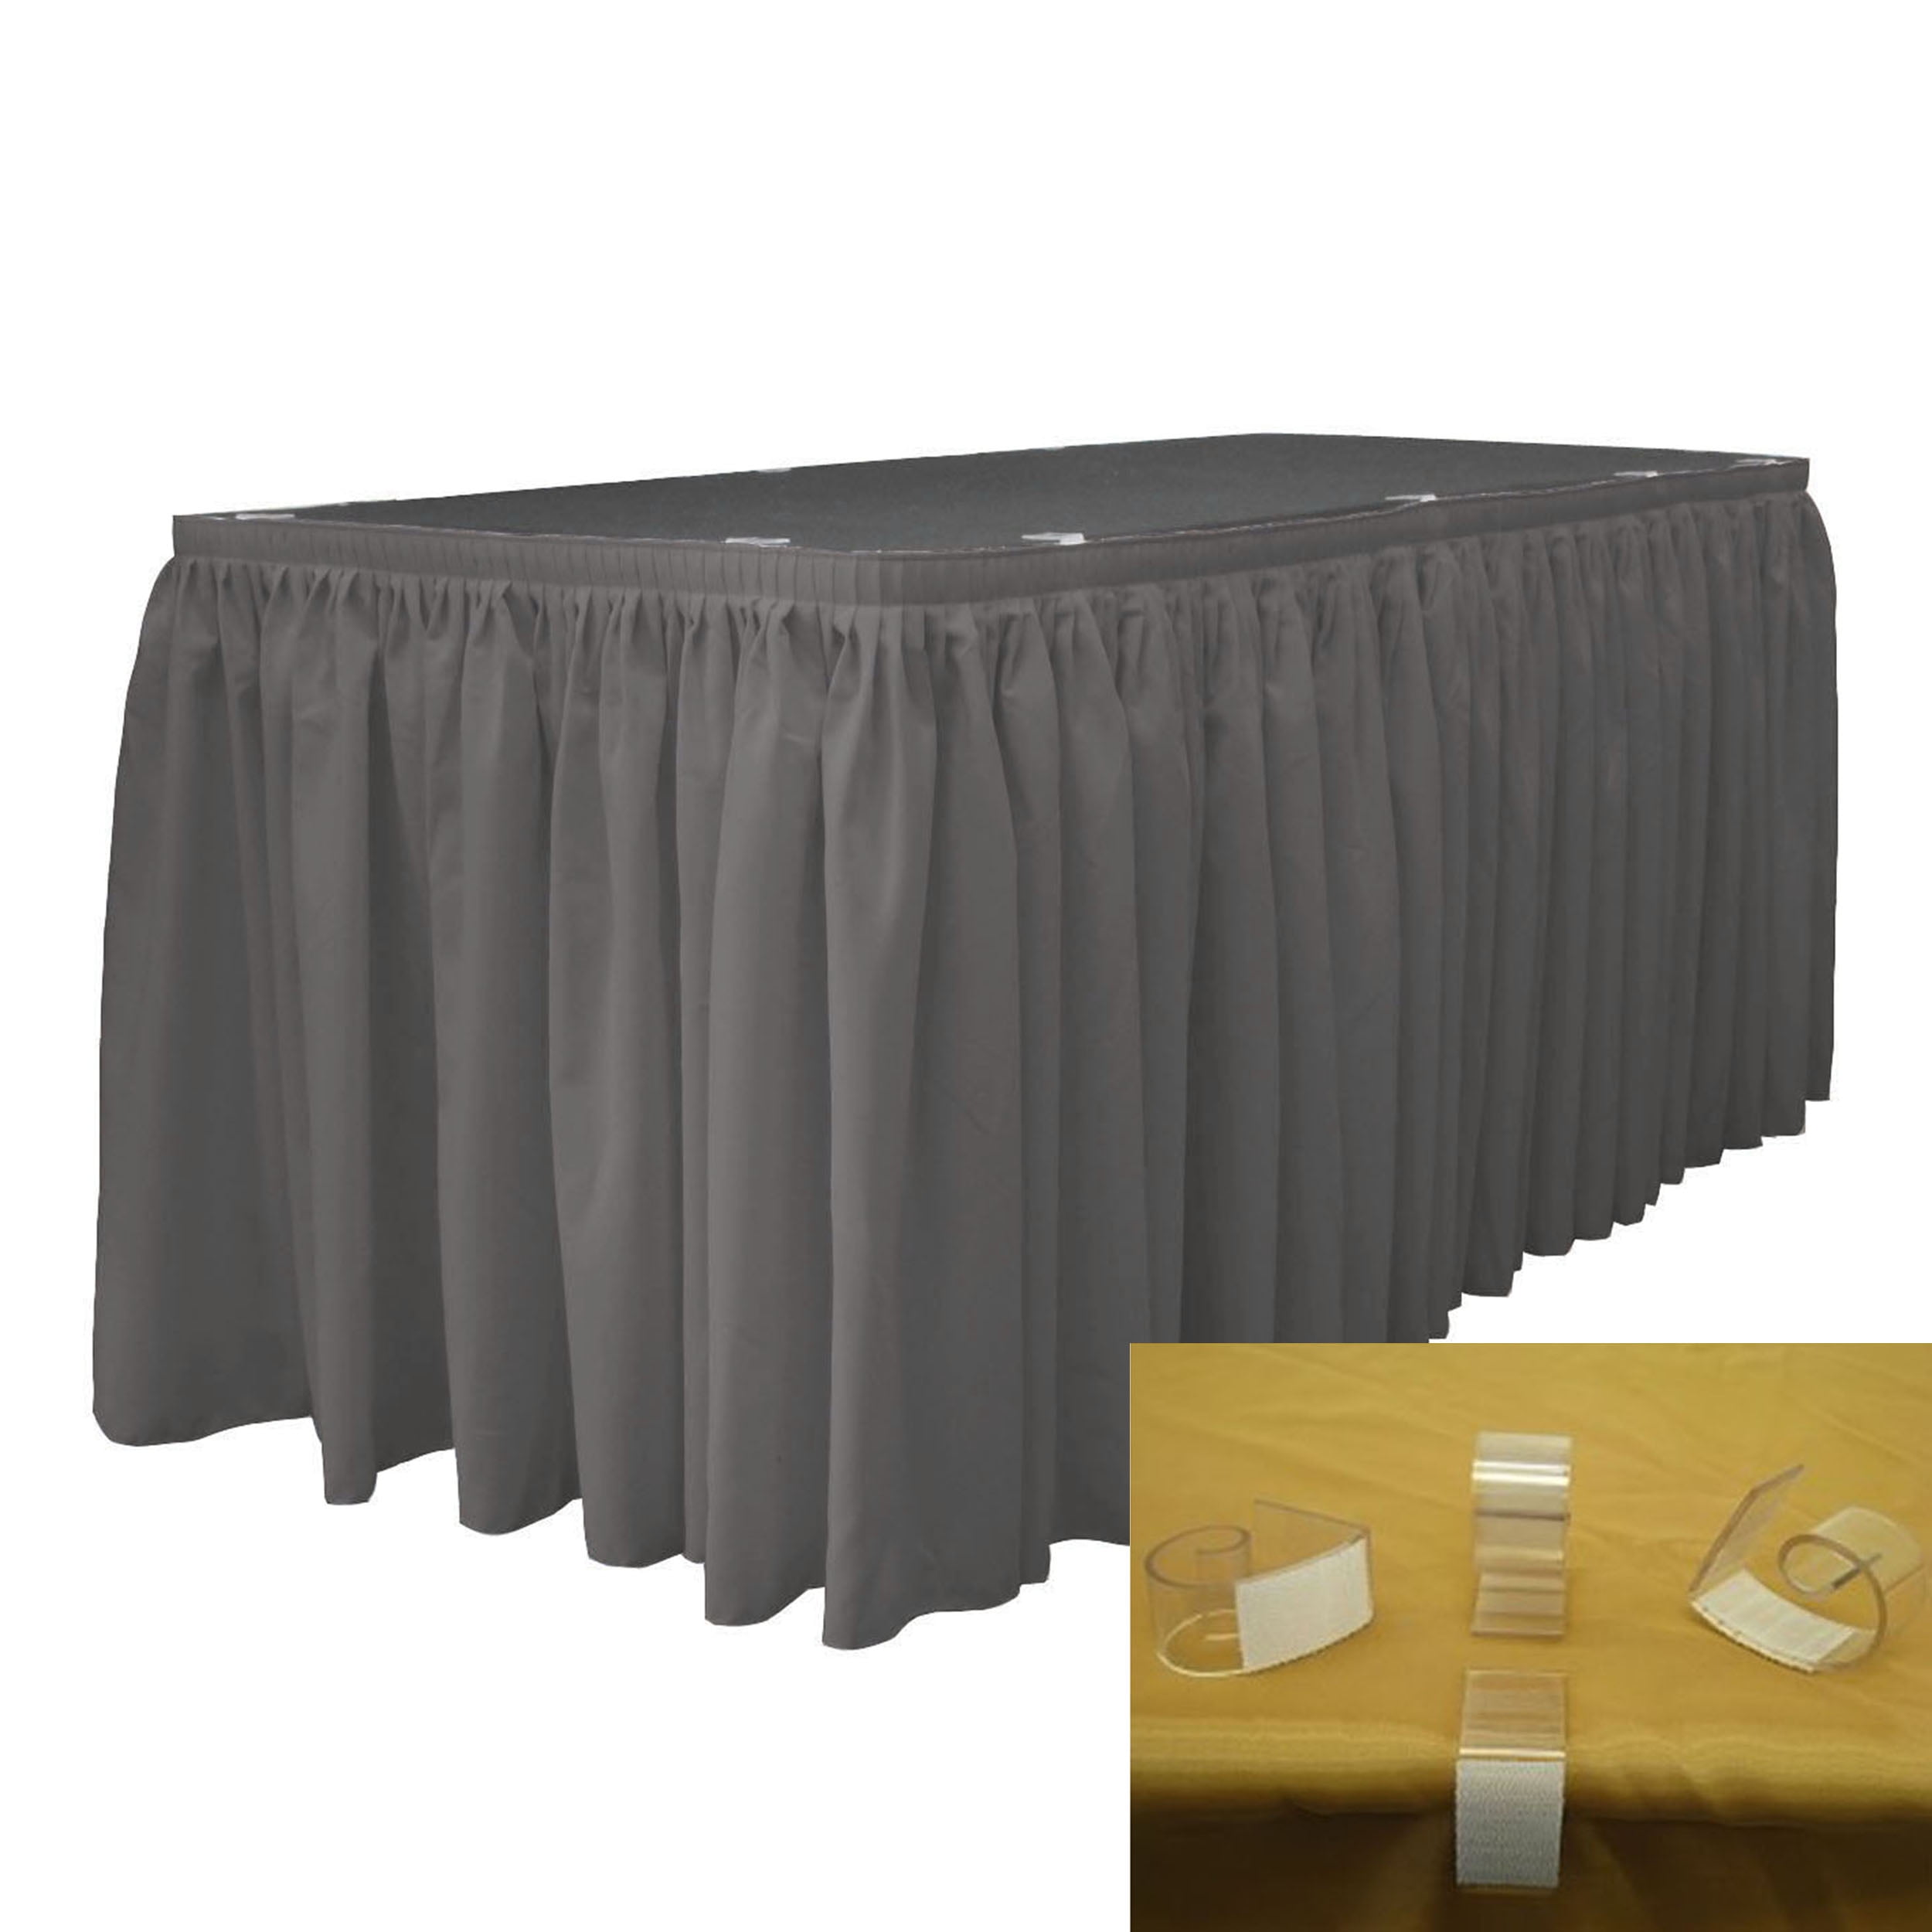 15 Table Skirts 14ft x 29" Banquet 100% Polyester Skirting 3 Colors Made USA 